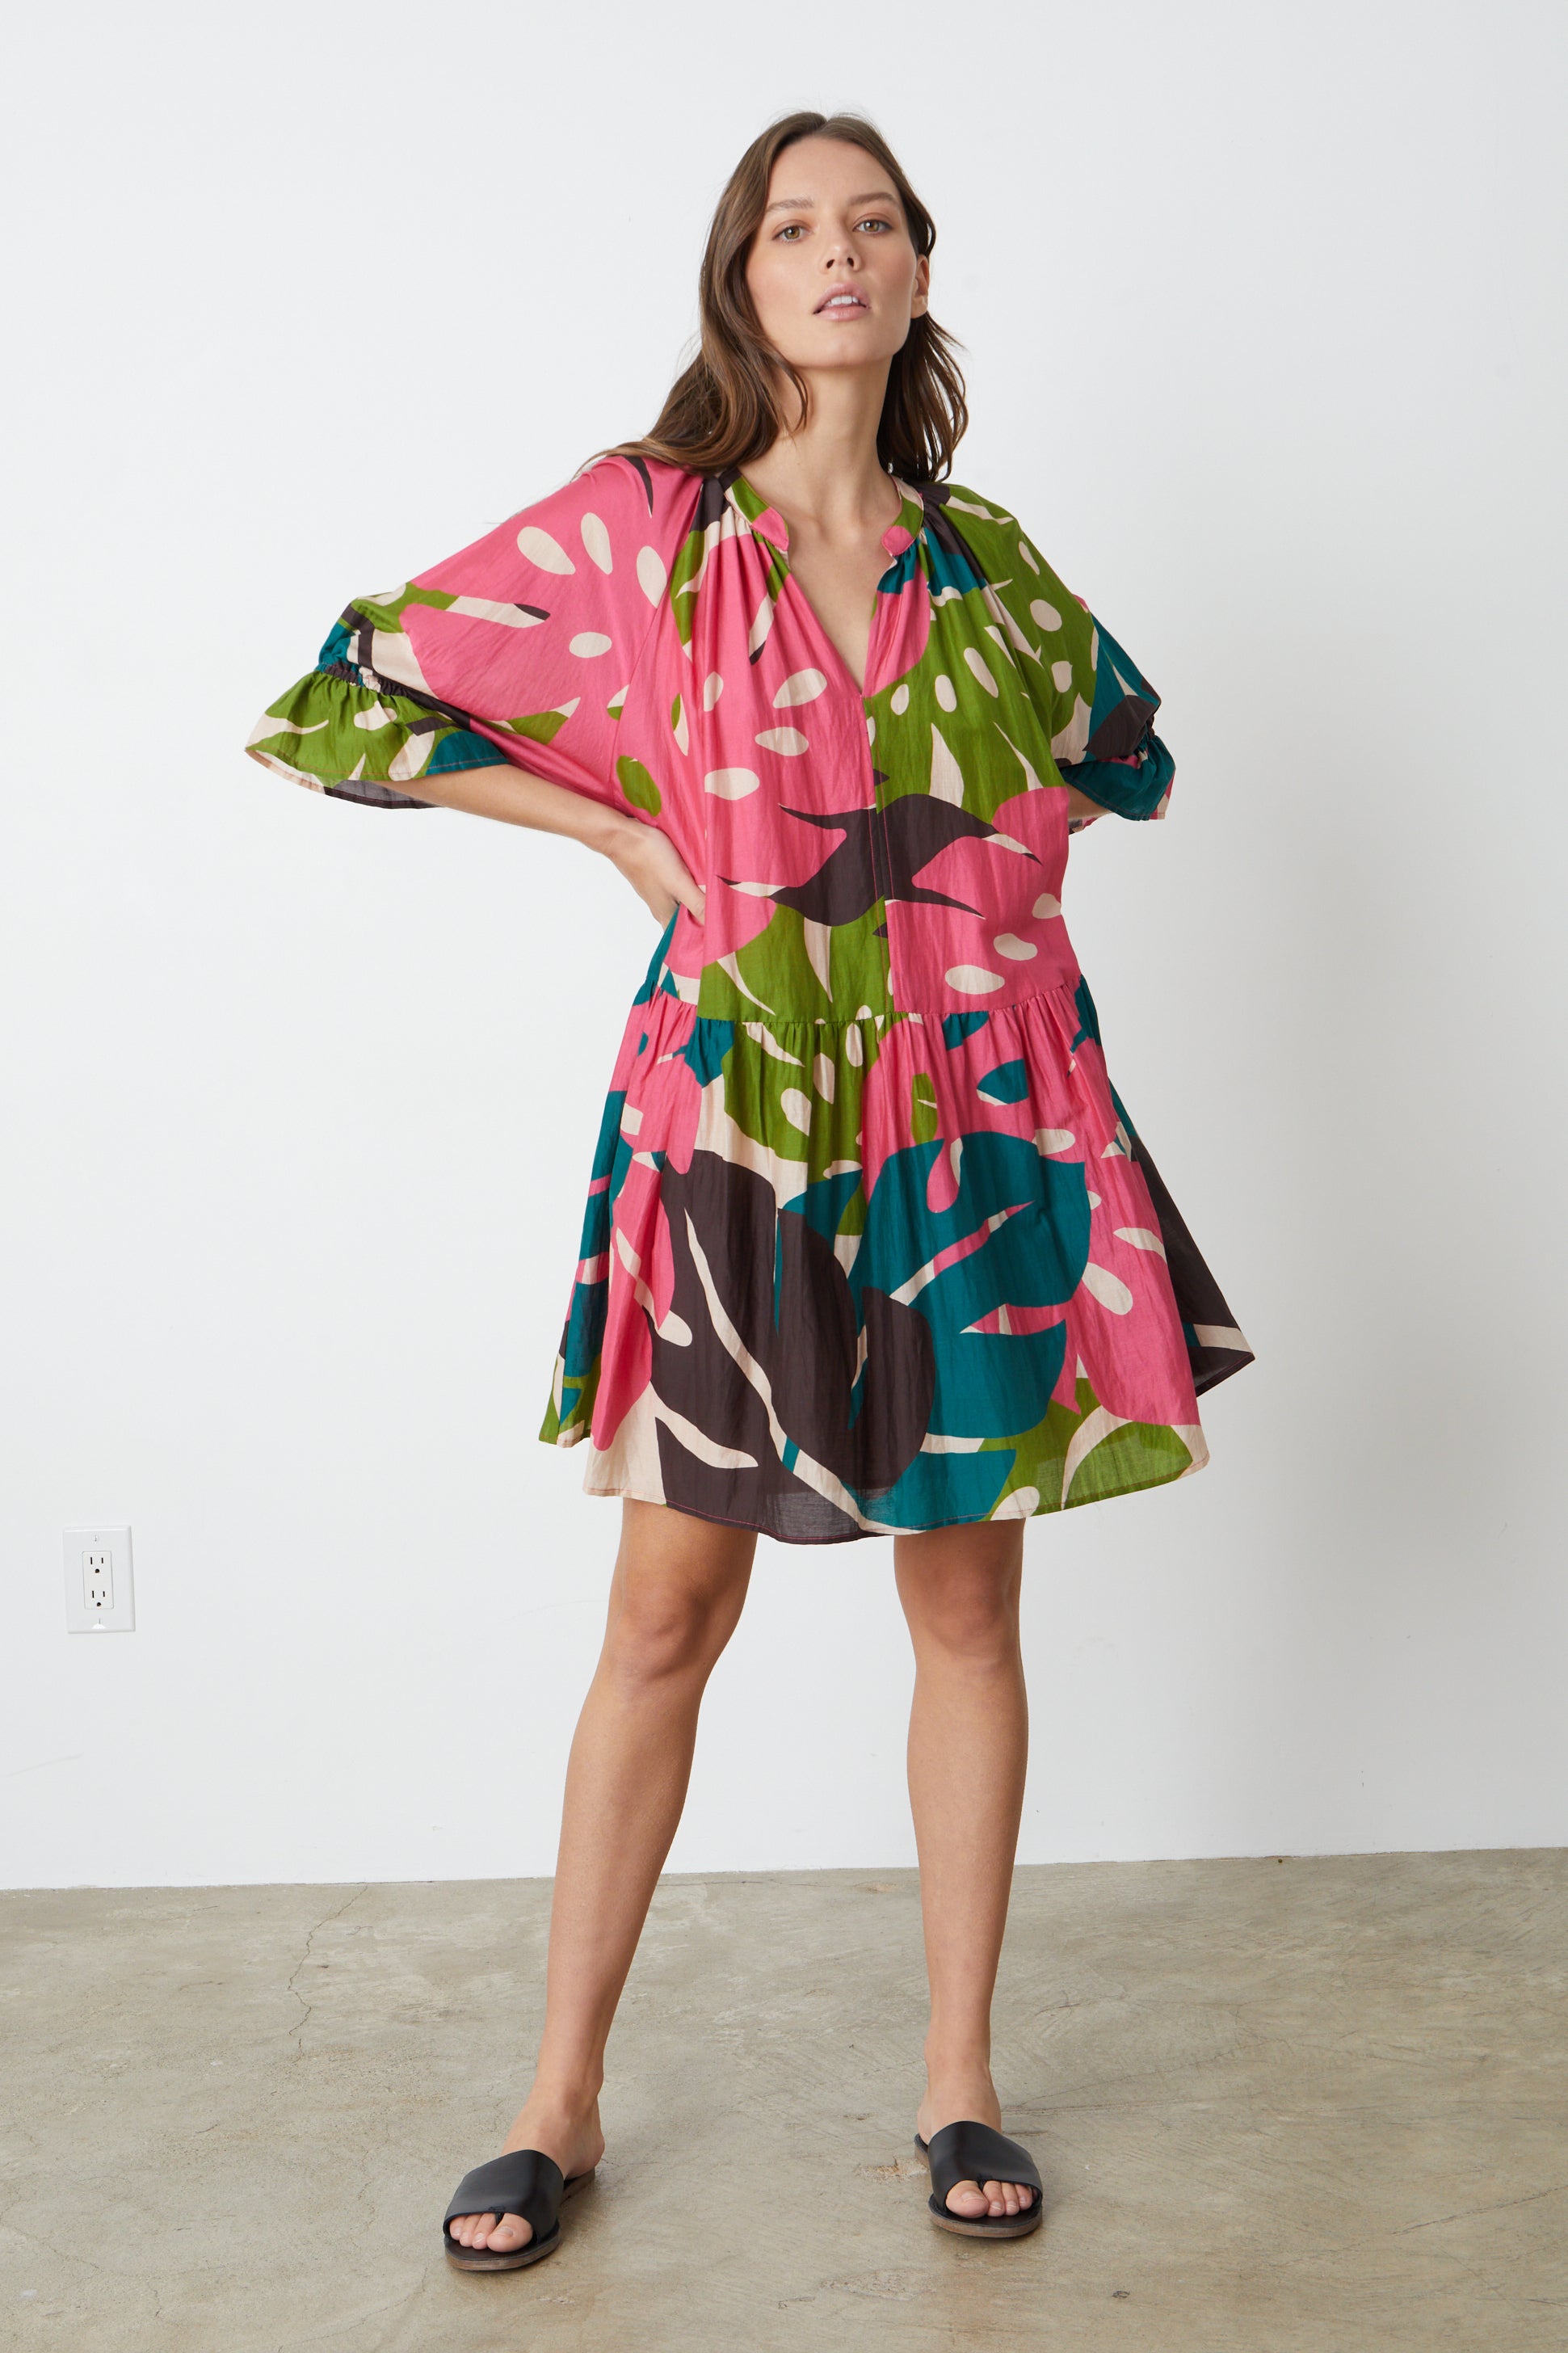   The model is wearing a Velvet by Graham & Spencer TRACY PRINTED DRESS with ruffles in bold colored Monstera print 